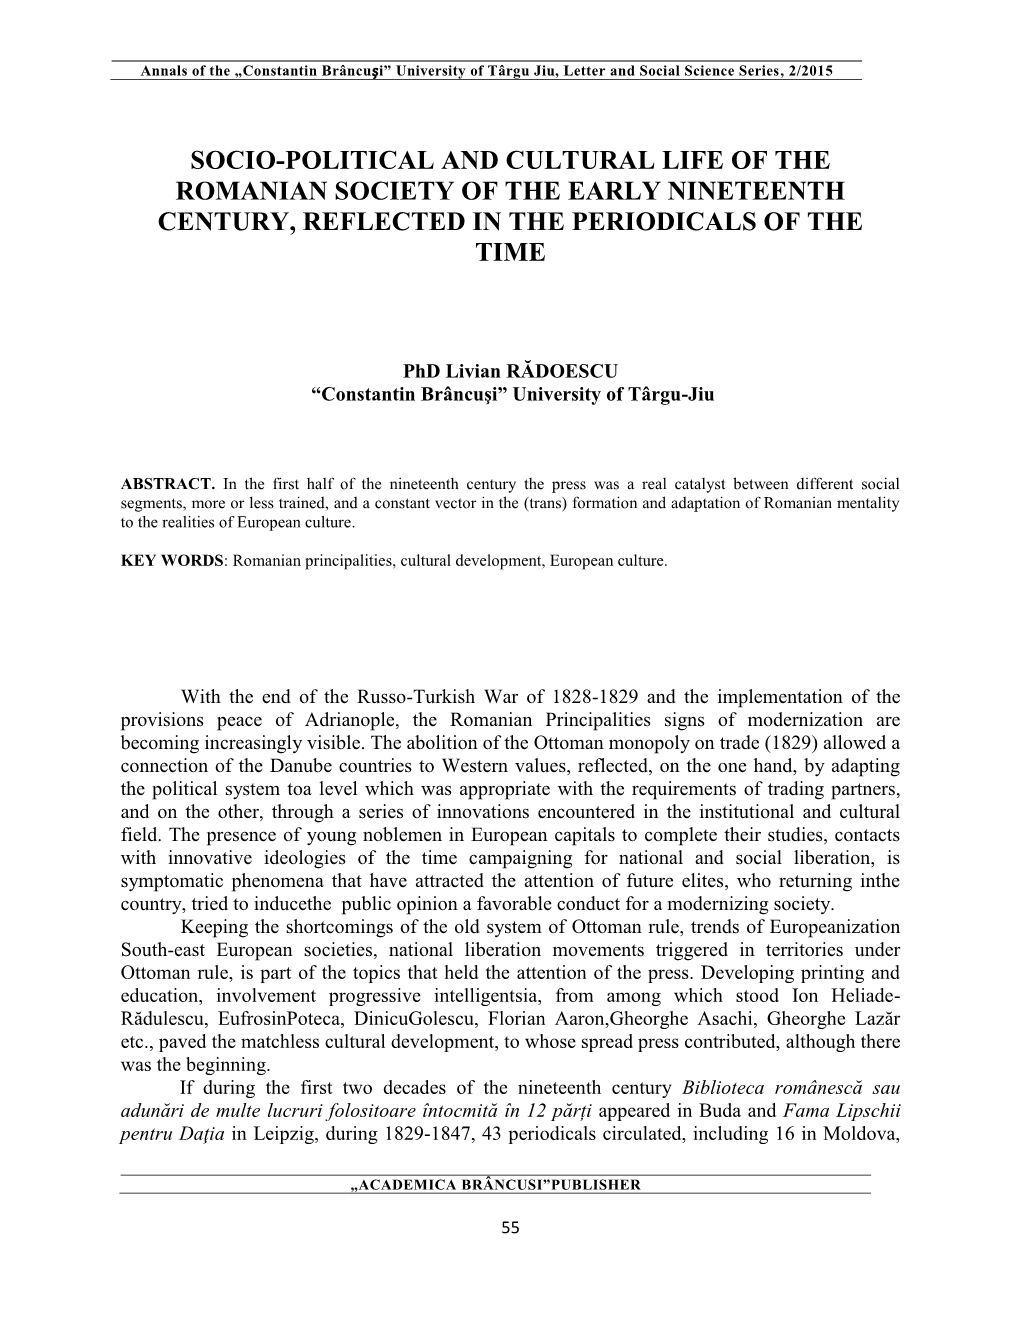 Socio-Political and Cultural Life of the Romanian Society of the Early Nineteenth Century, Reflected in the Periodicals of the Time